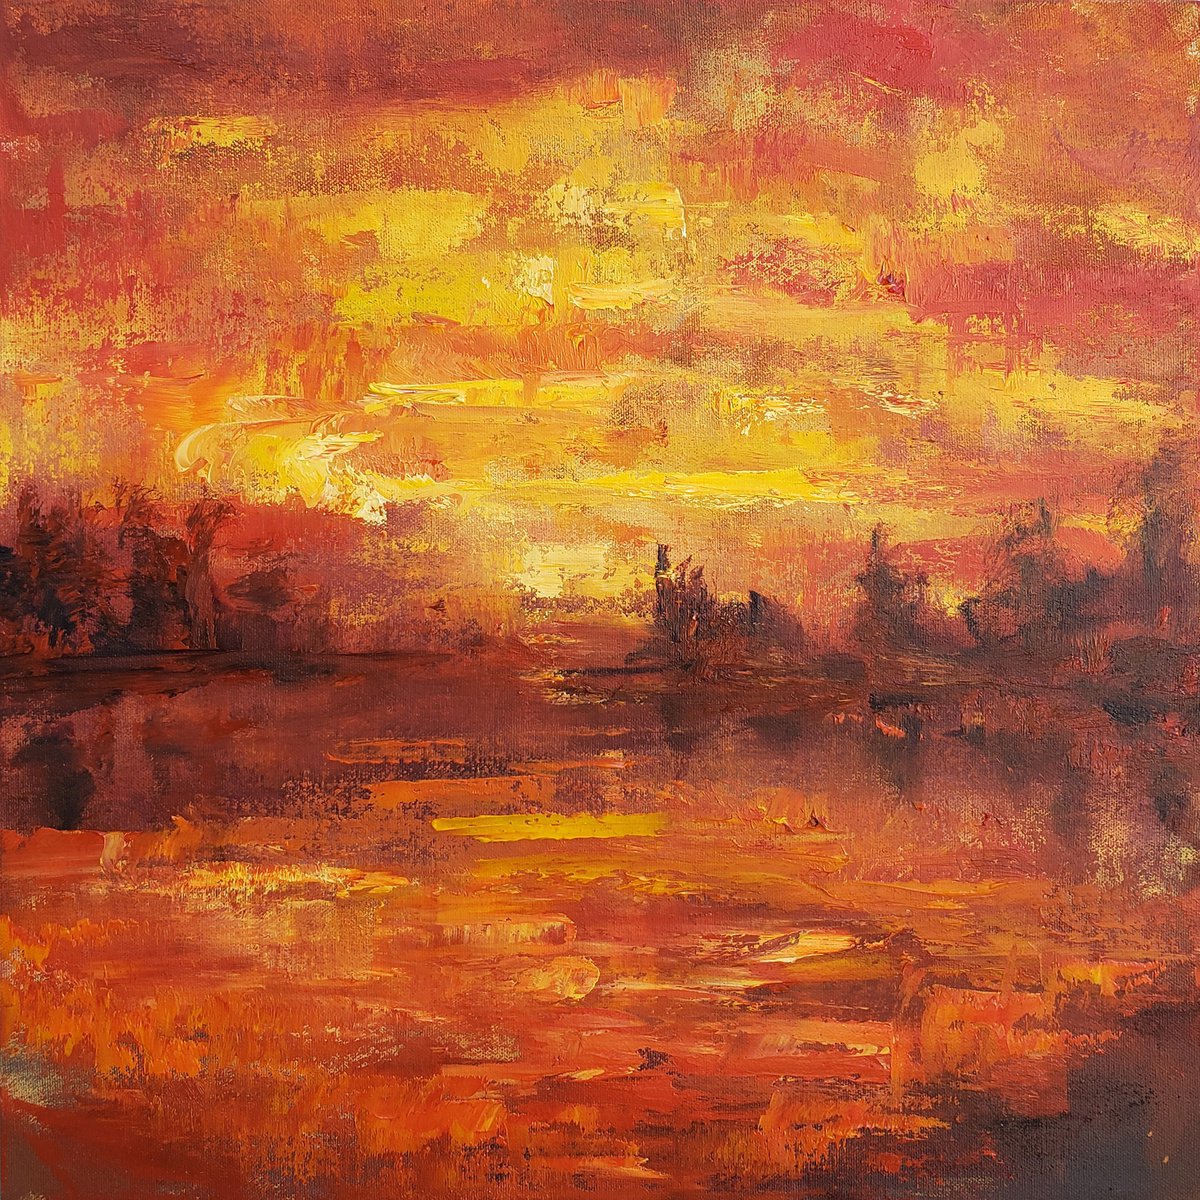 Fire Sky 3 by Roy Featherstone